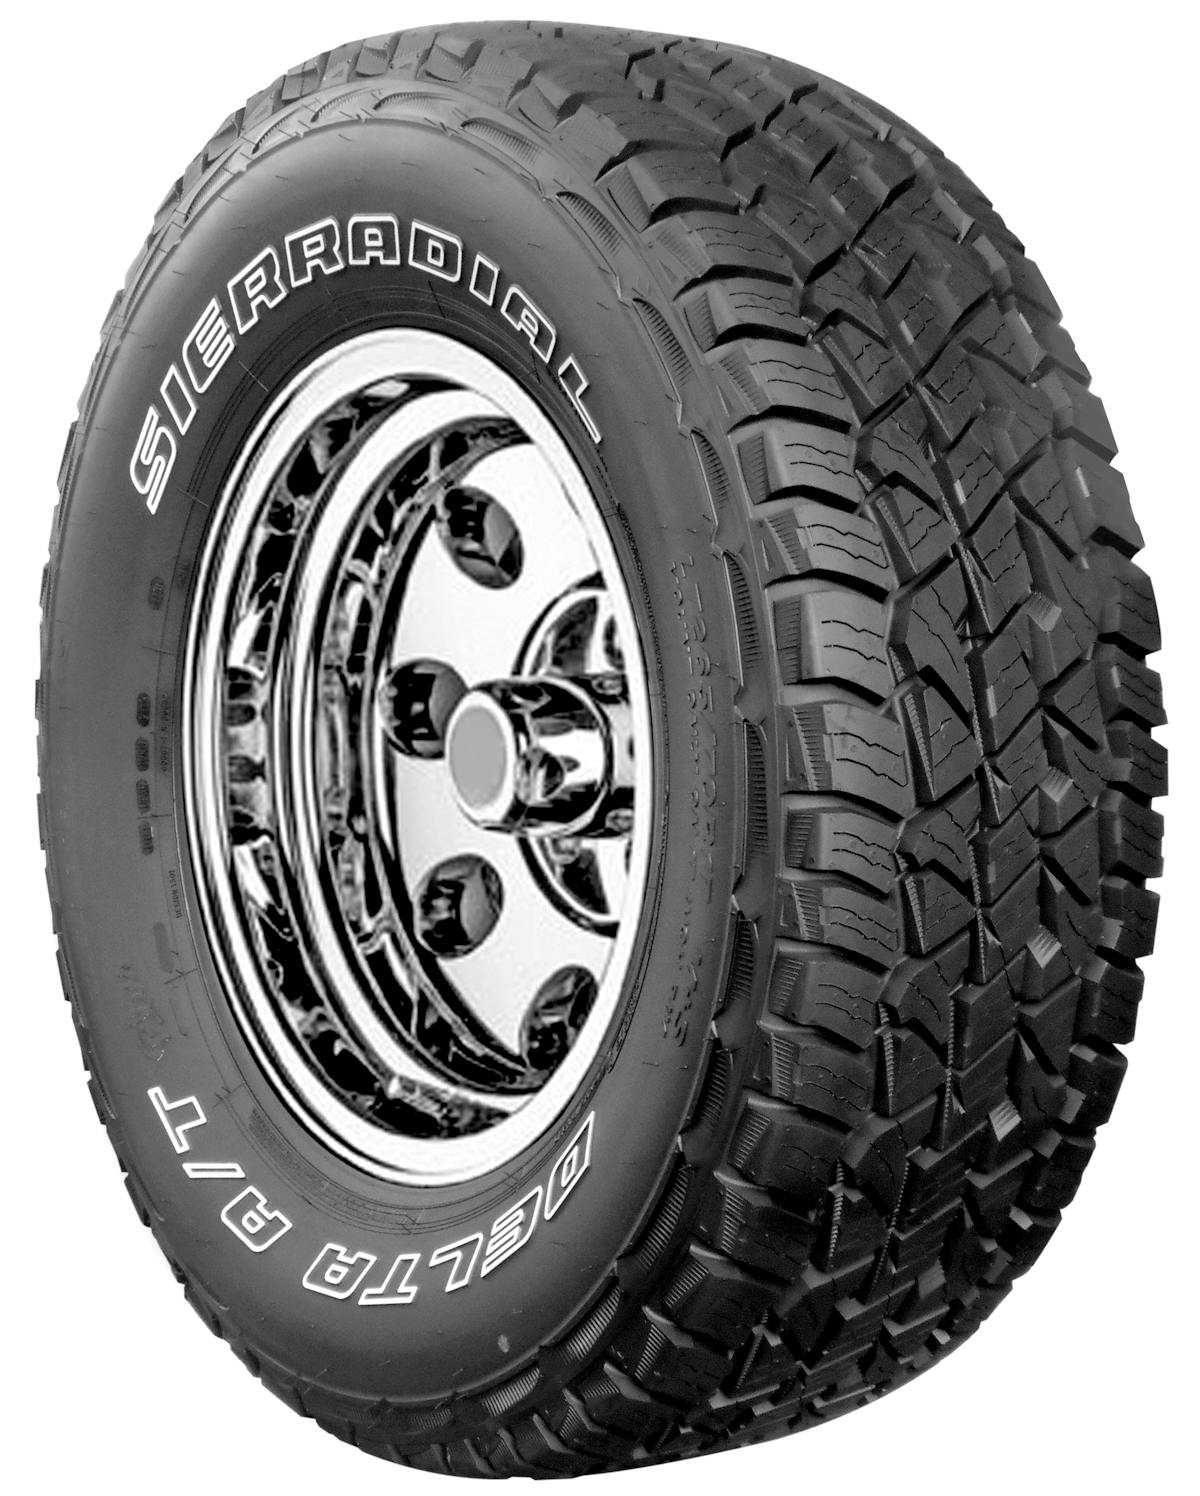 del-nat-tire-offers-at-plus-suv-lt-tire